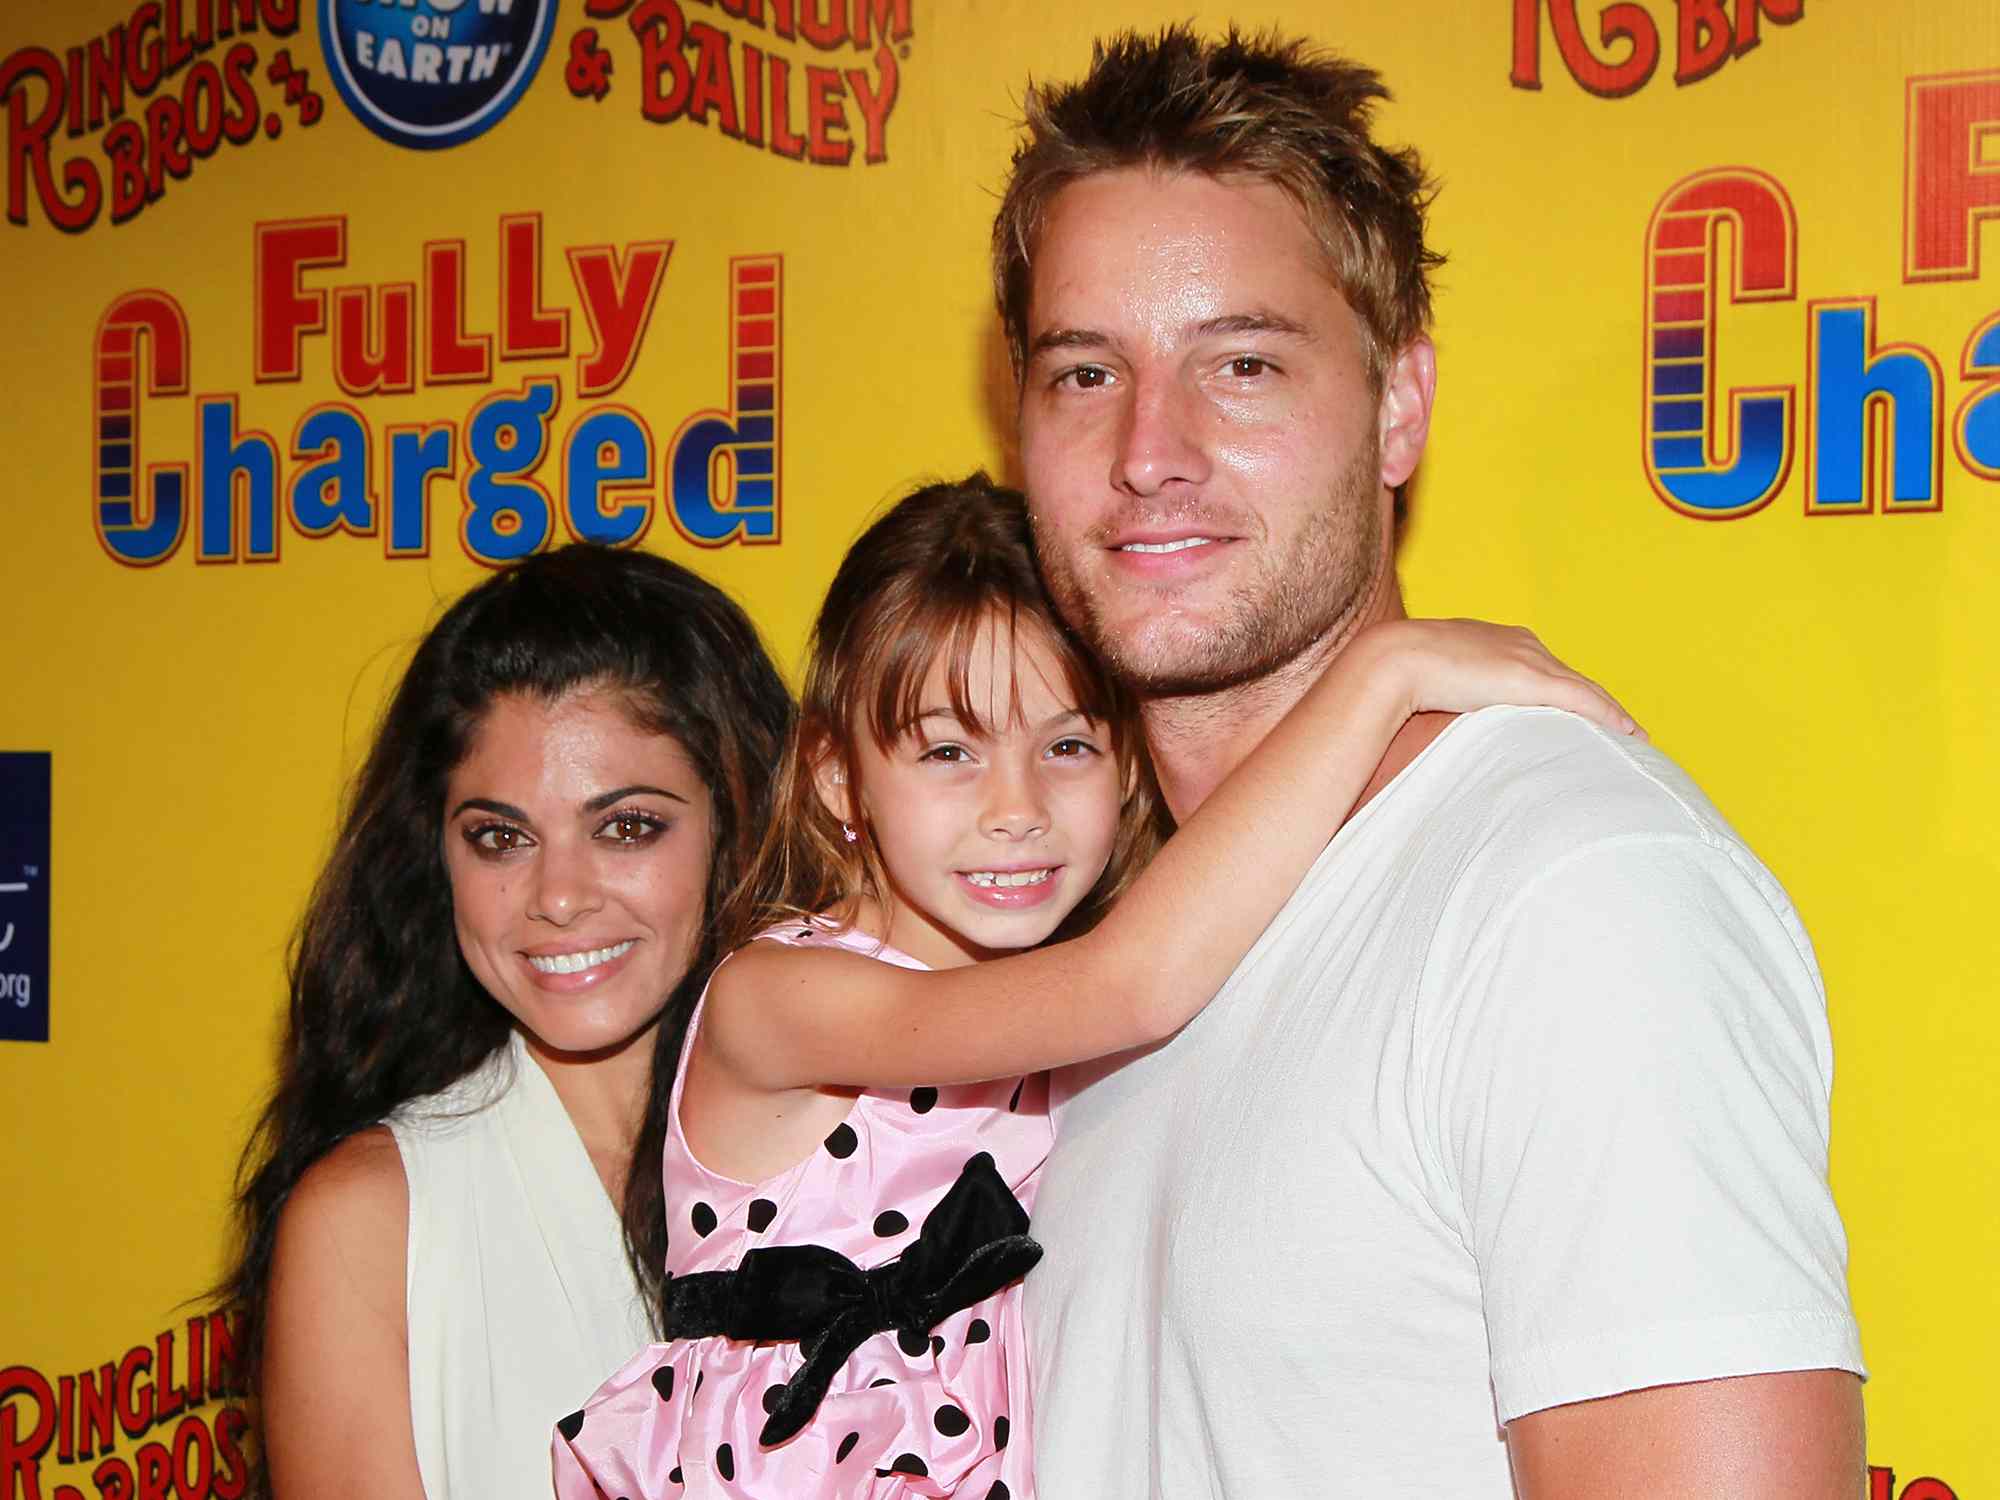 Lindsay Hartley, daughter Isabella Hartley and husband actor Justin Hartley attend Ringling Bros. & Barnum and Bailey & Starlight Children's Foundation's premiere of "Fully Charged" at Staples Center on July 21, 2011 in Los Angeles, California